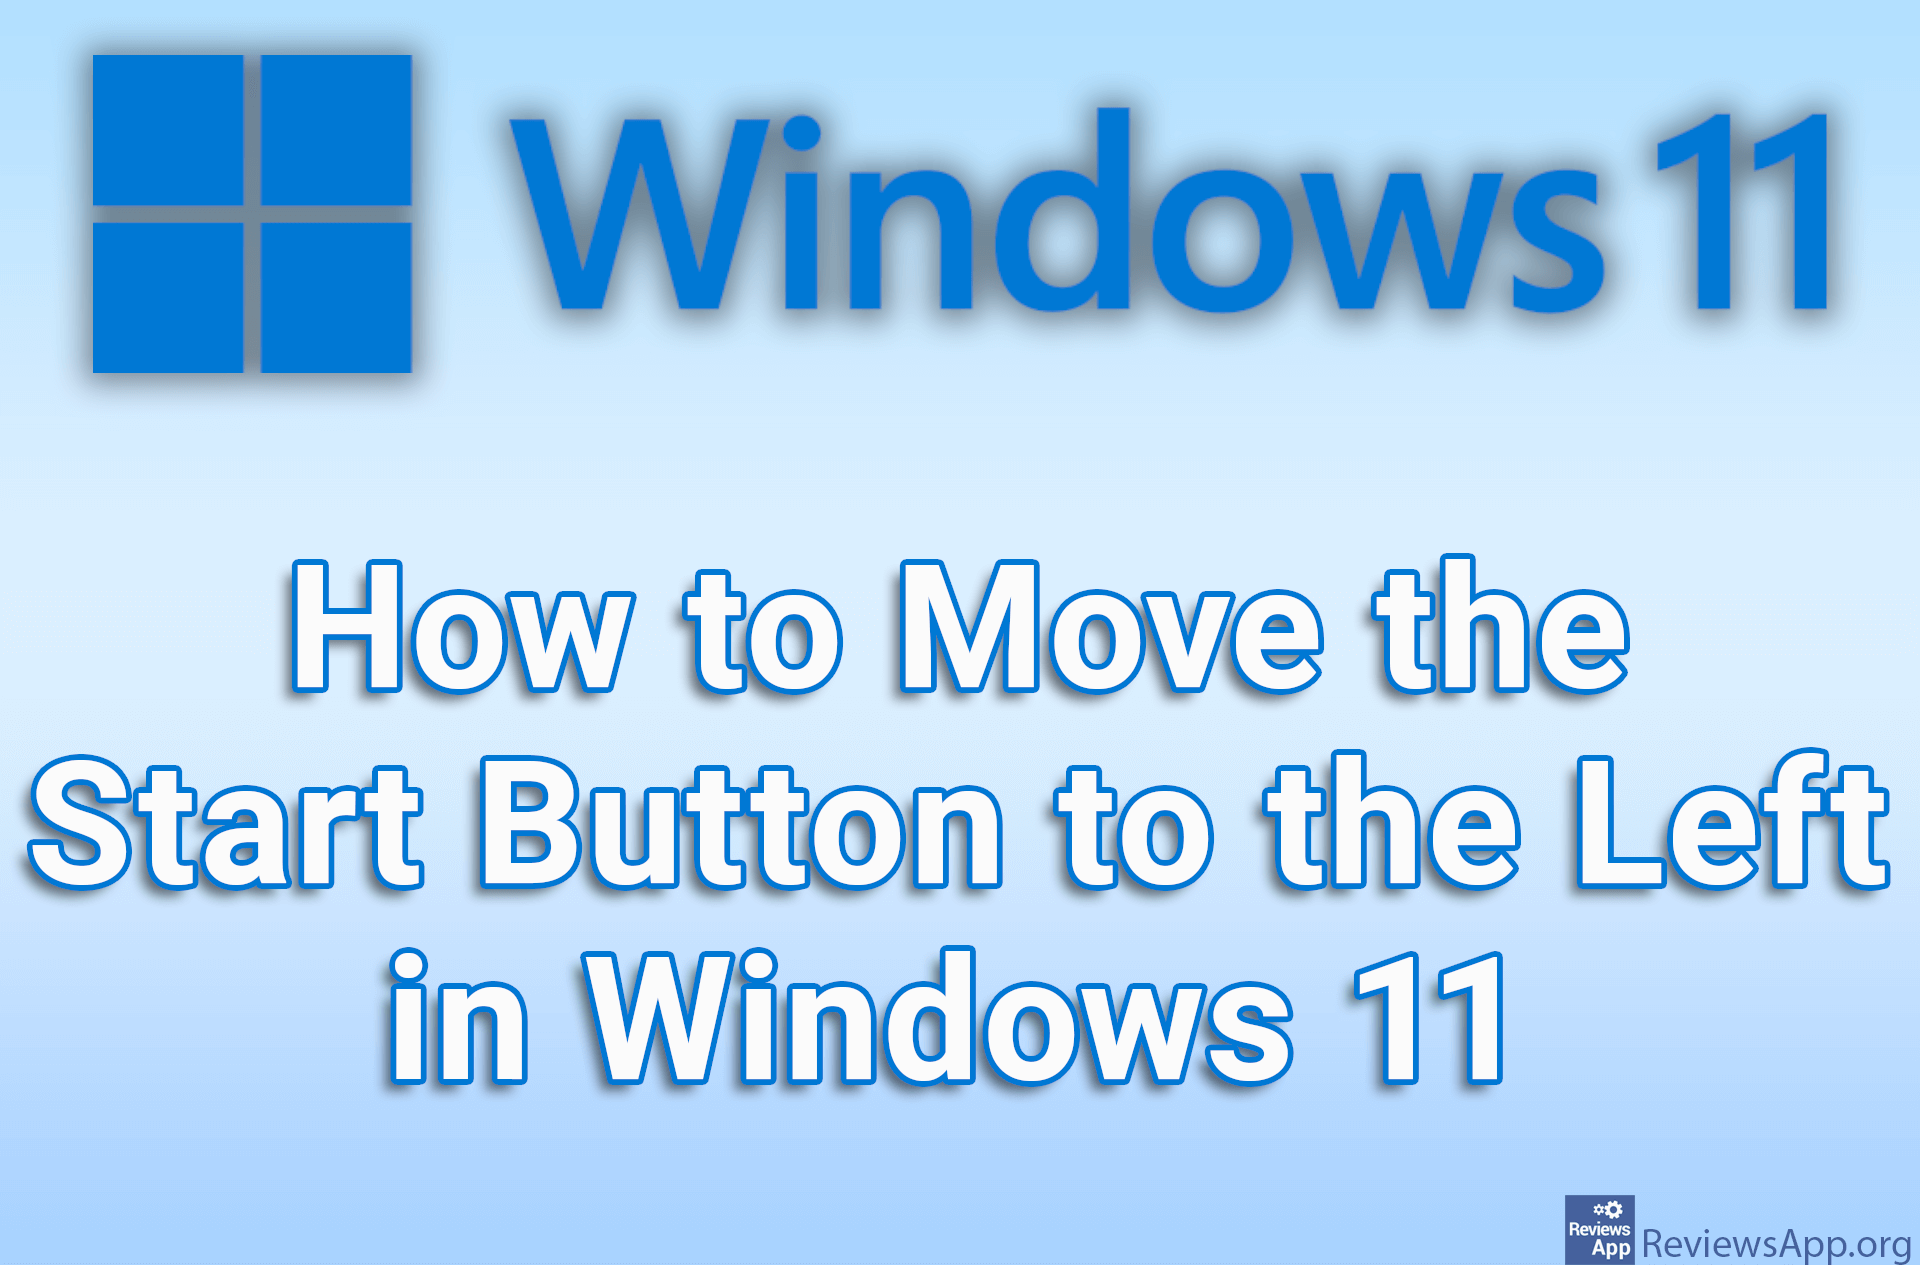 How to Move the Start Button to the Left in Windows 11